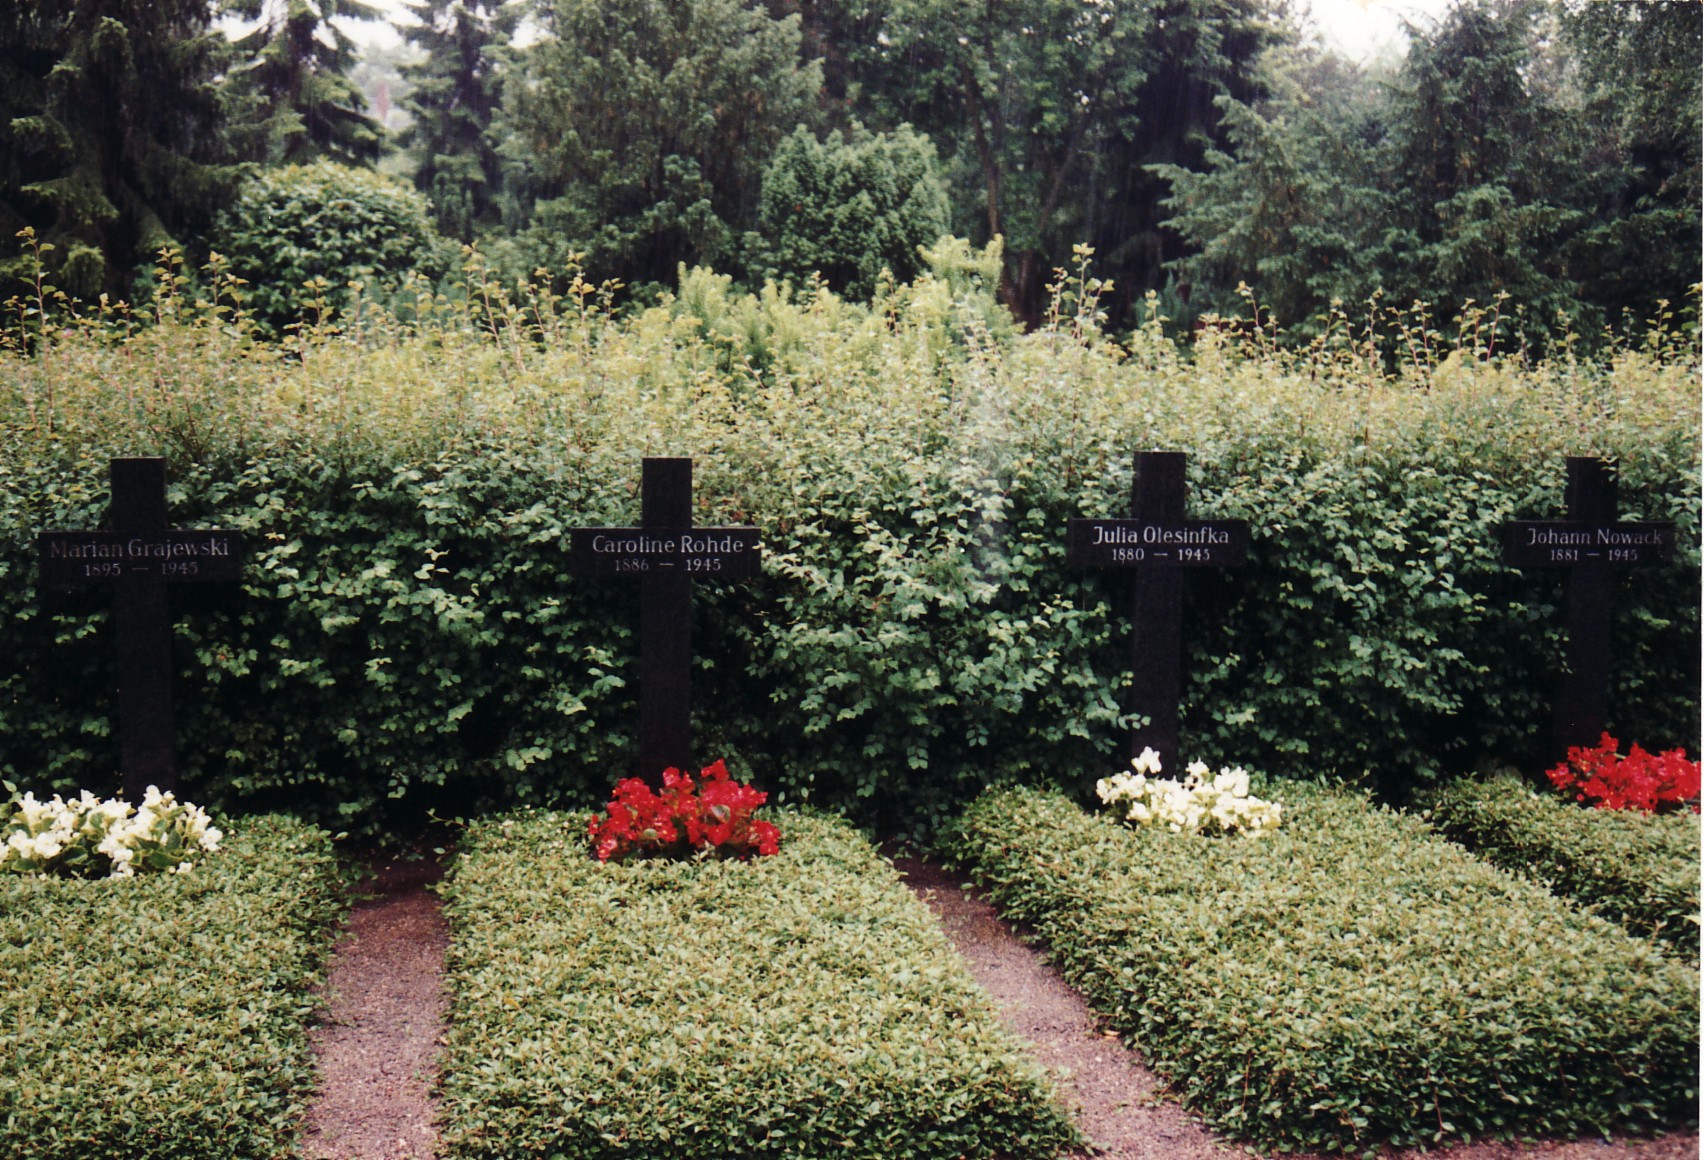 Graves at the burial ground for war victims